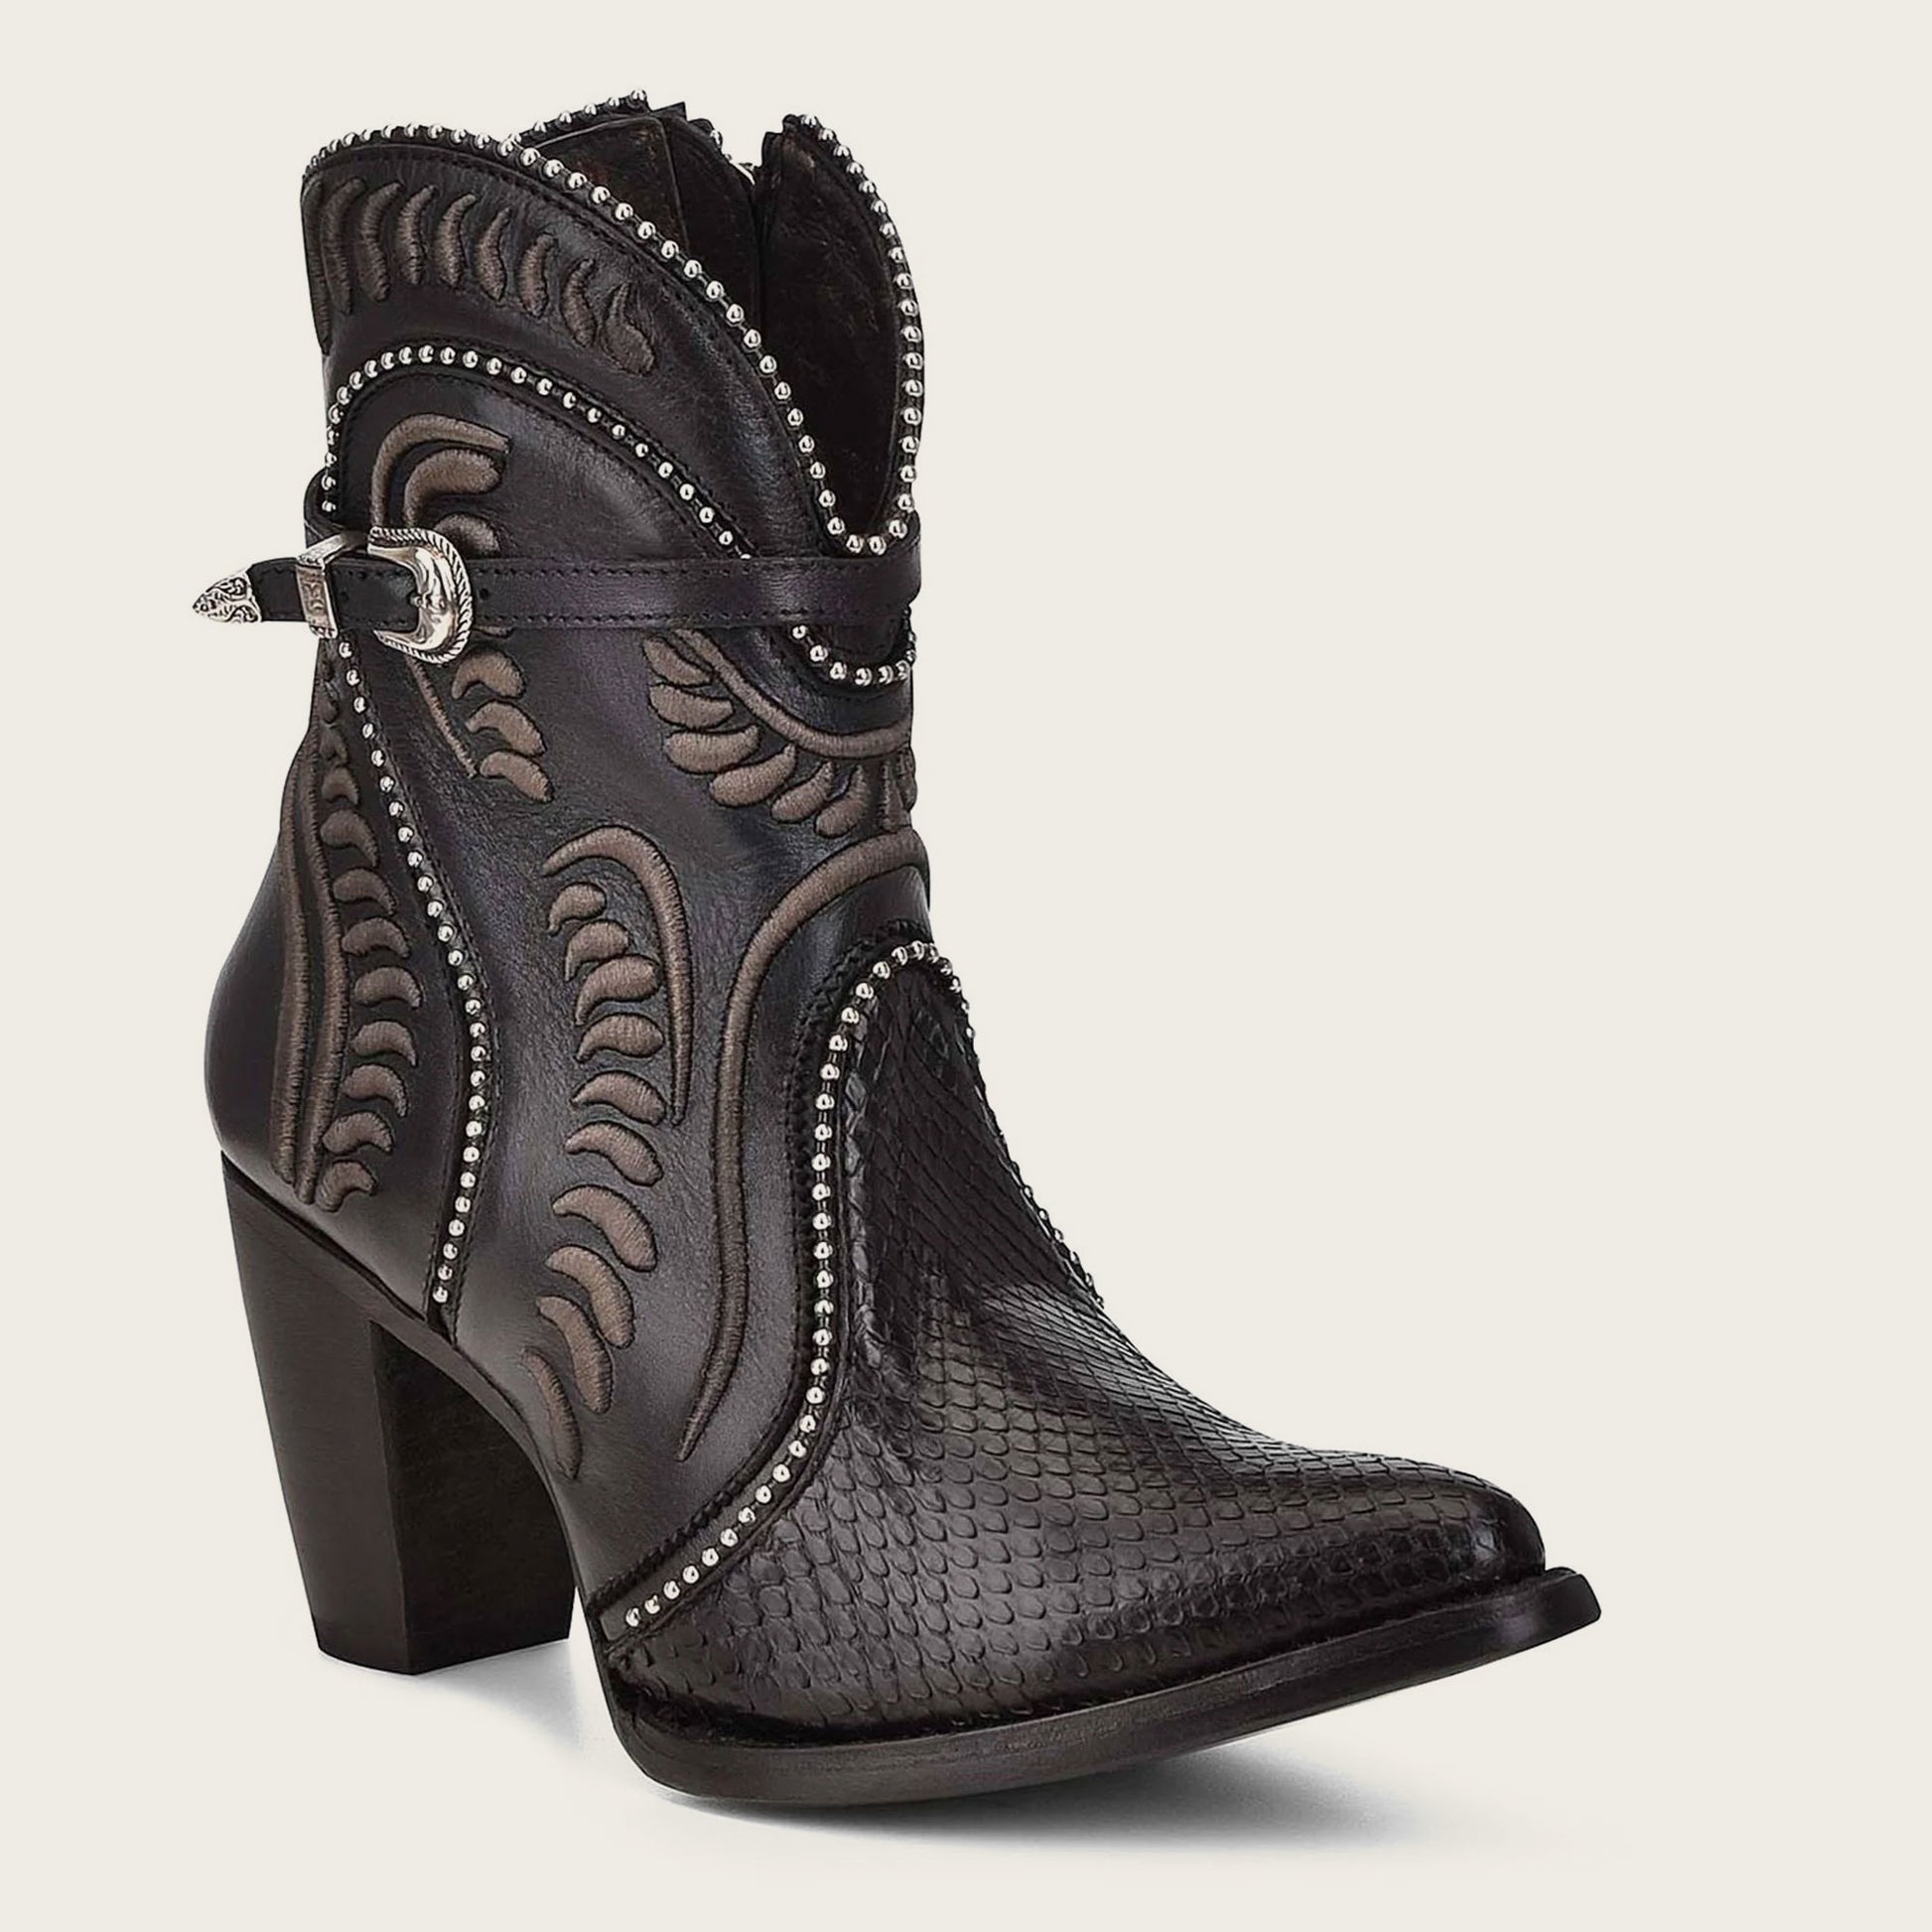 Step into sophistication with our exquisite women's genuine python embroidered black leather bootie.